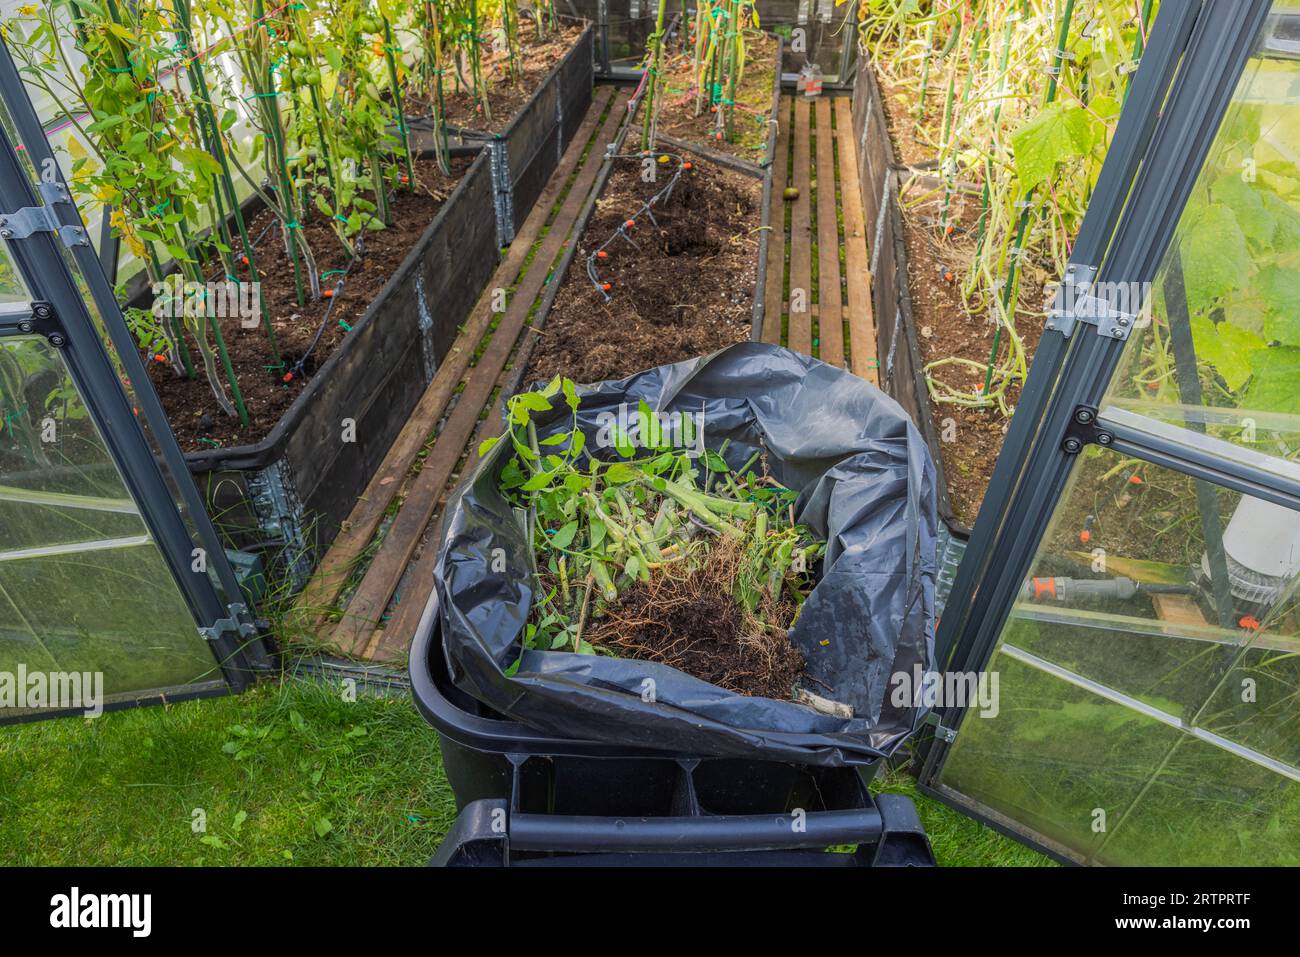 Close-up view of greenhouse with plastic bag under cleaning after harvesting in autumn. Sweden. Stock Photo